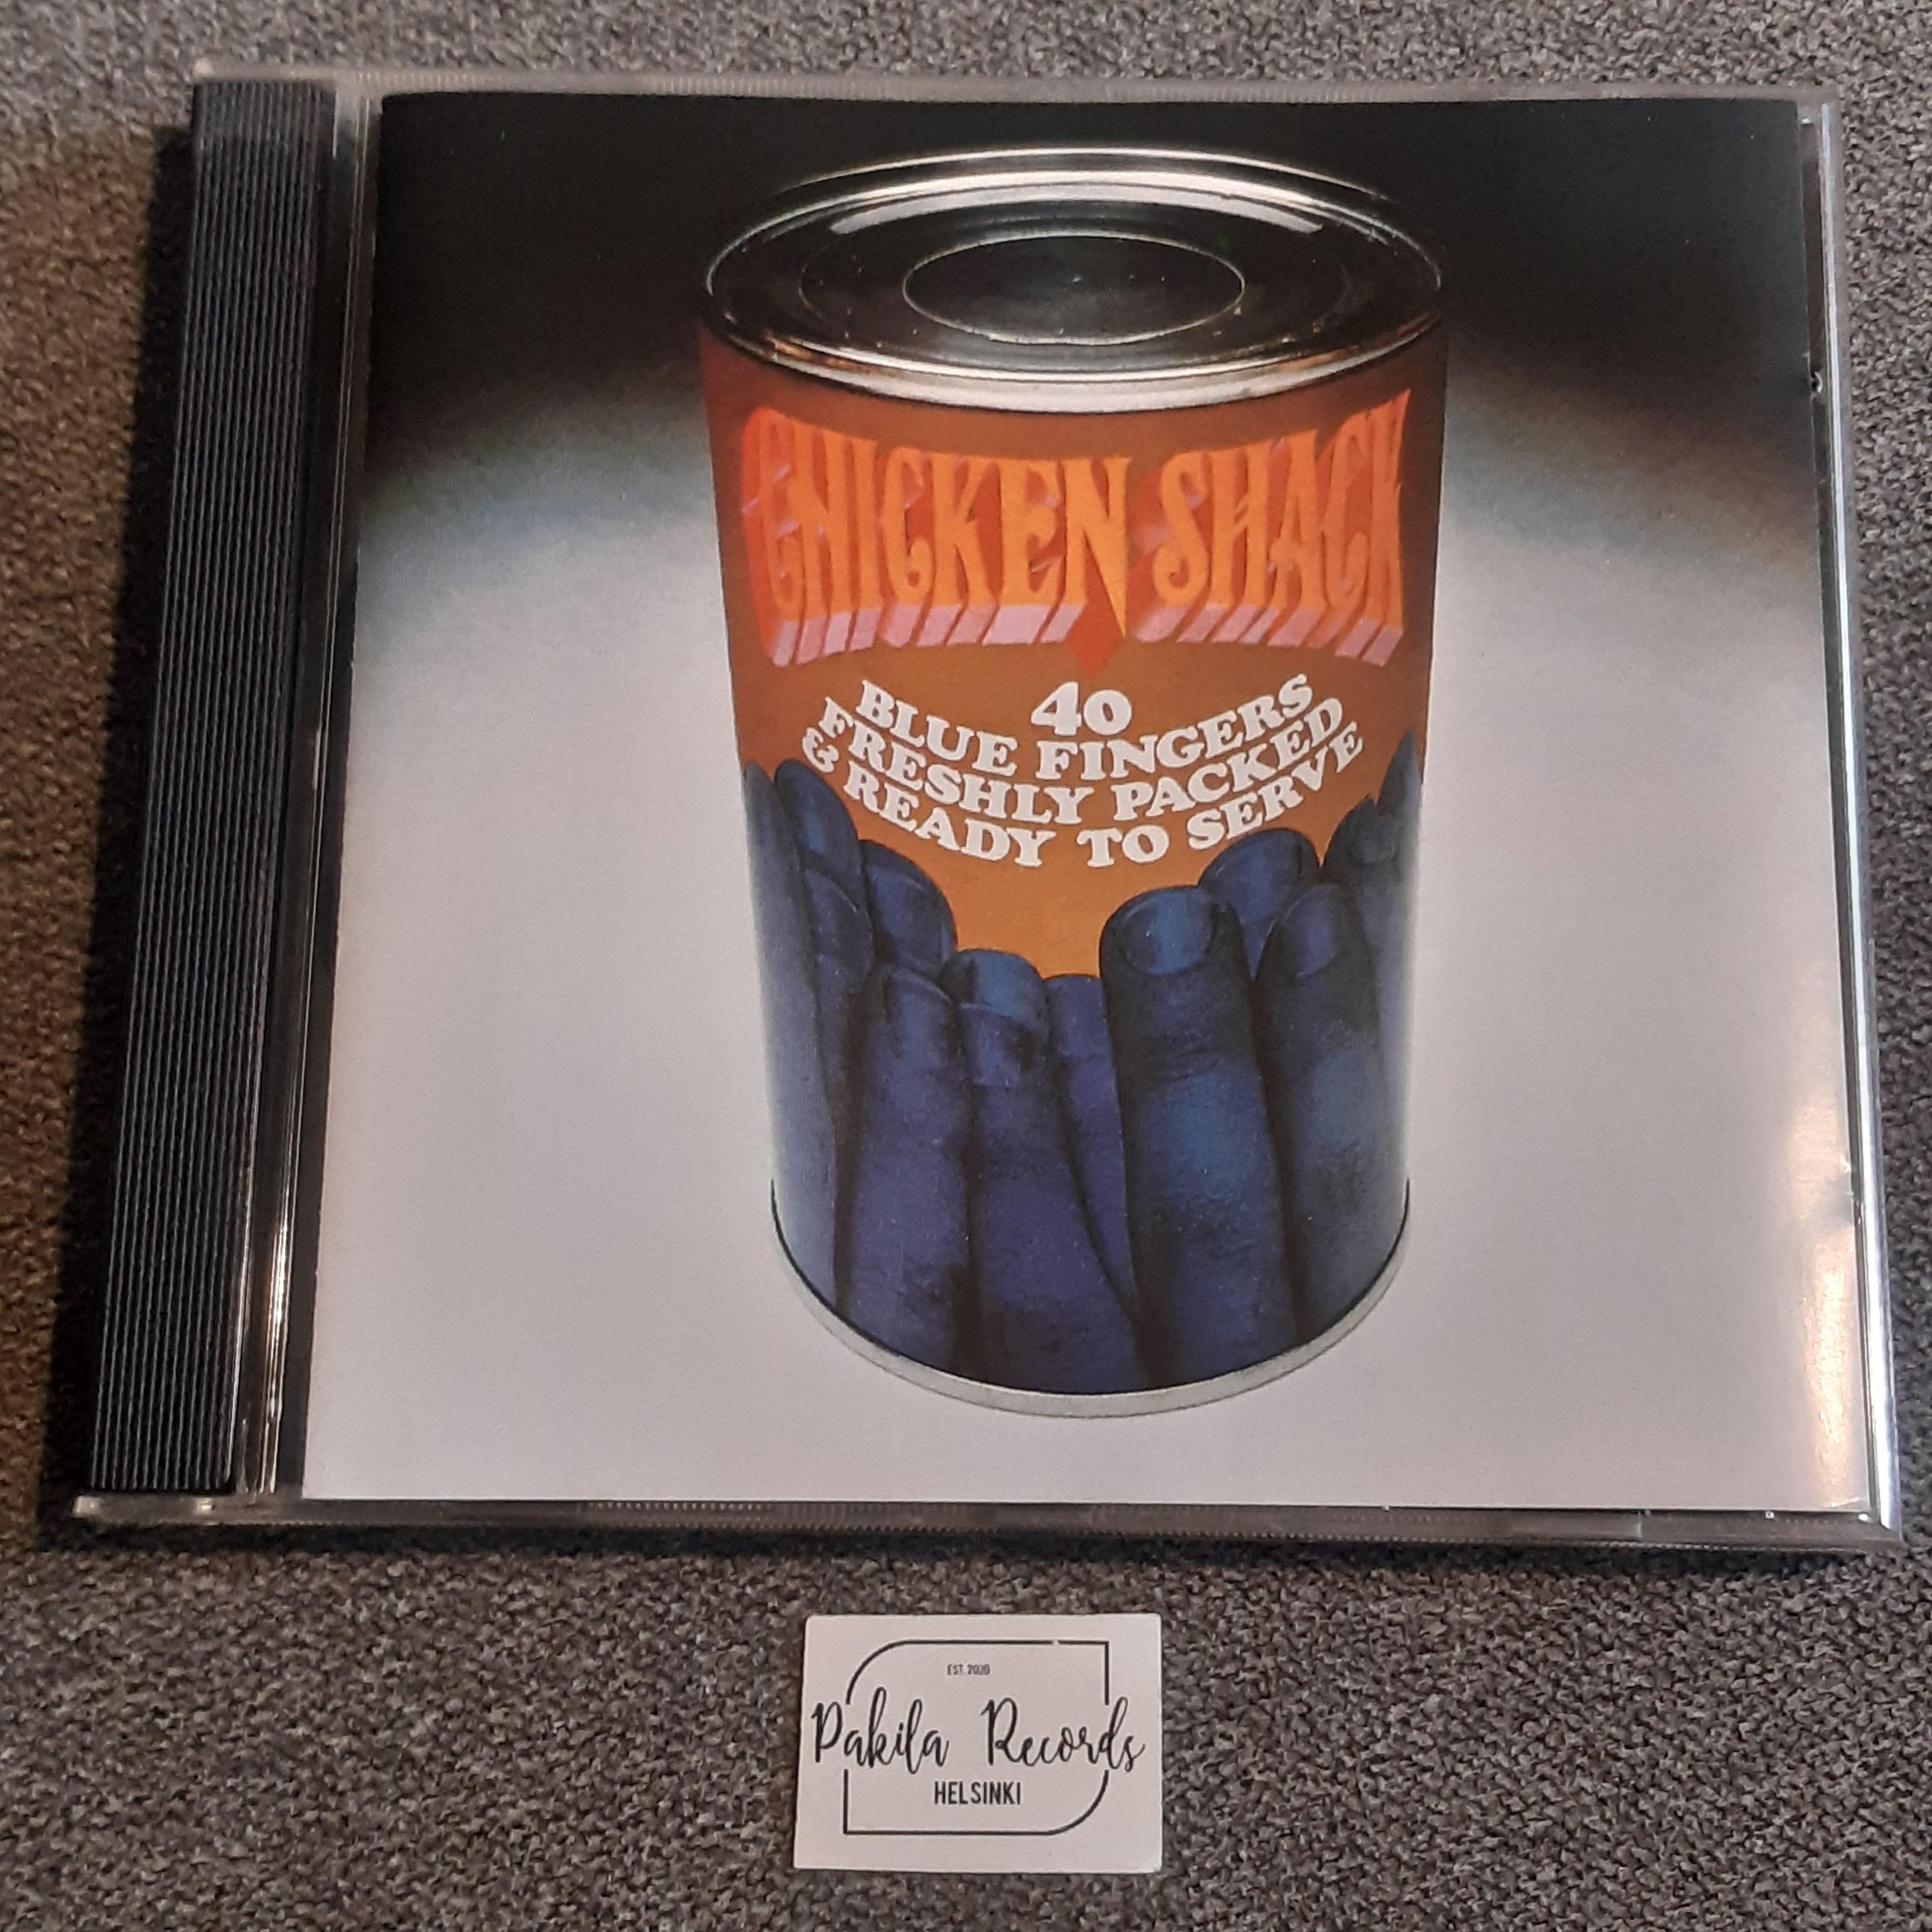 Chicken Shack - Forty Blue Fingers, Freshly Packed And Ready To Serve - CD (käytetty)